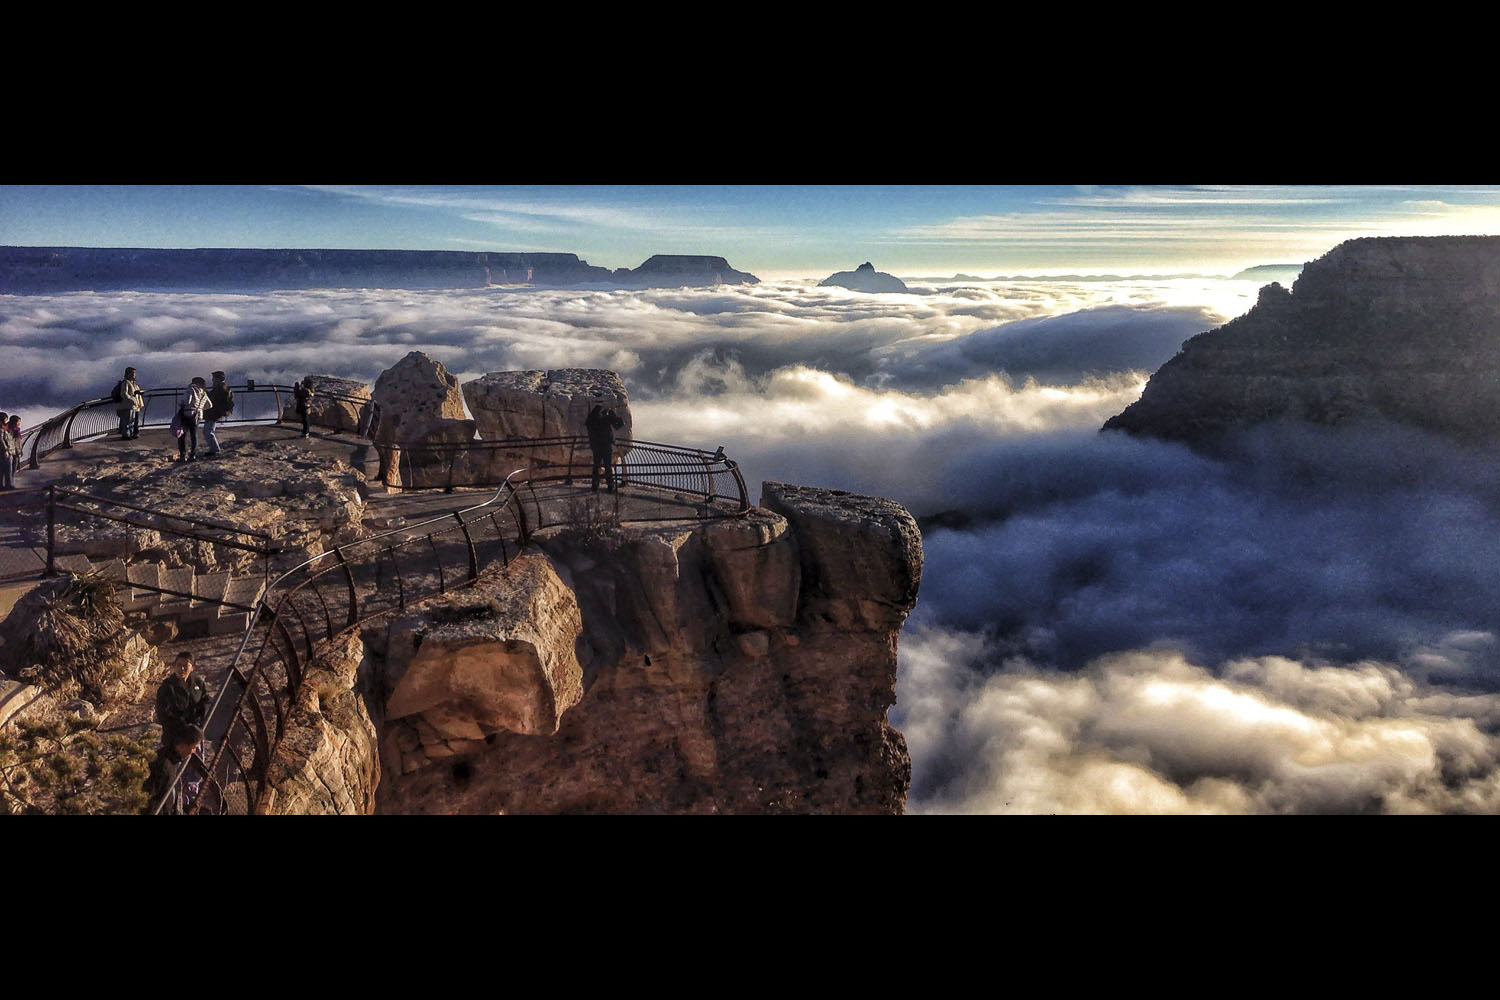 A rare total cloud inversion is pictured at Mather Point on the South Rim of the Grand Canyon National Park